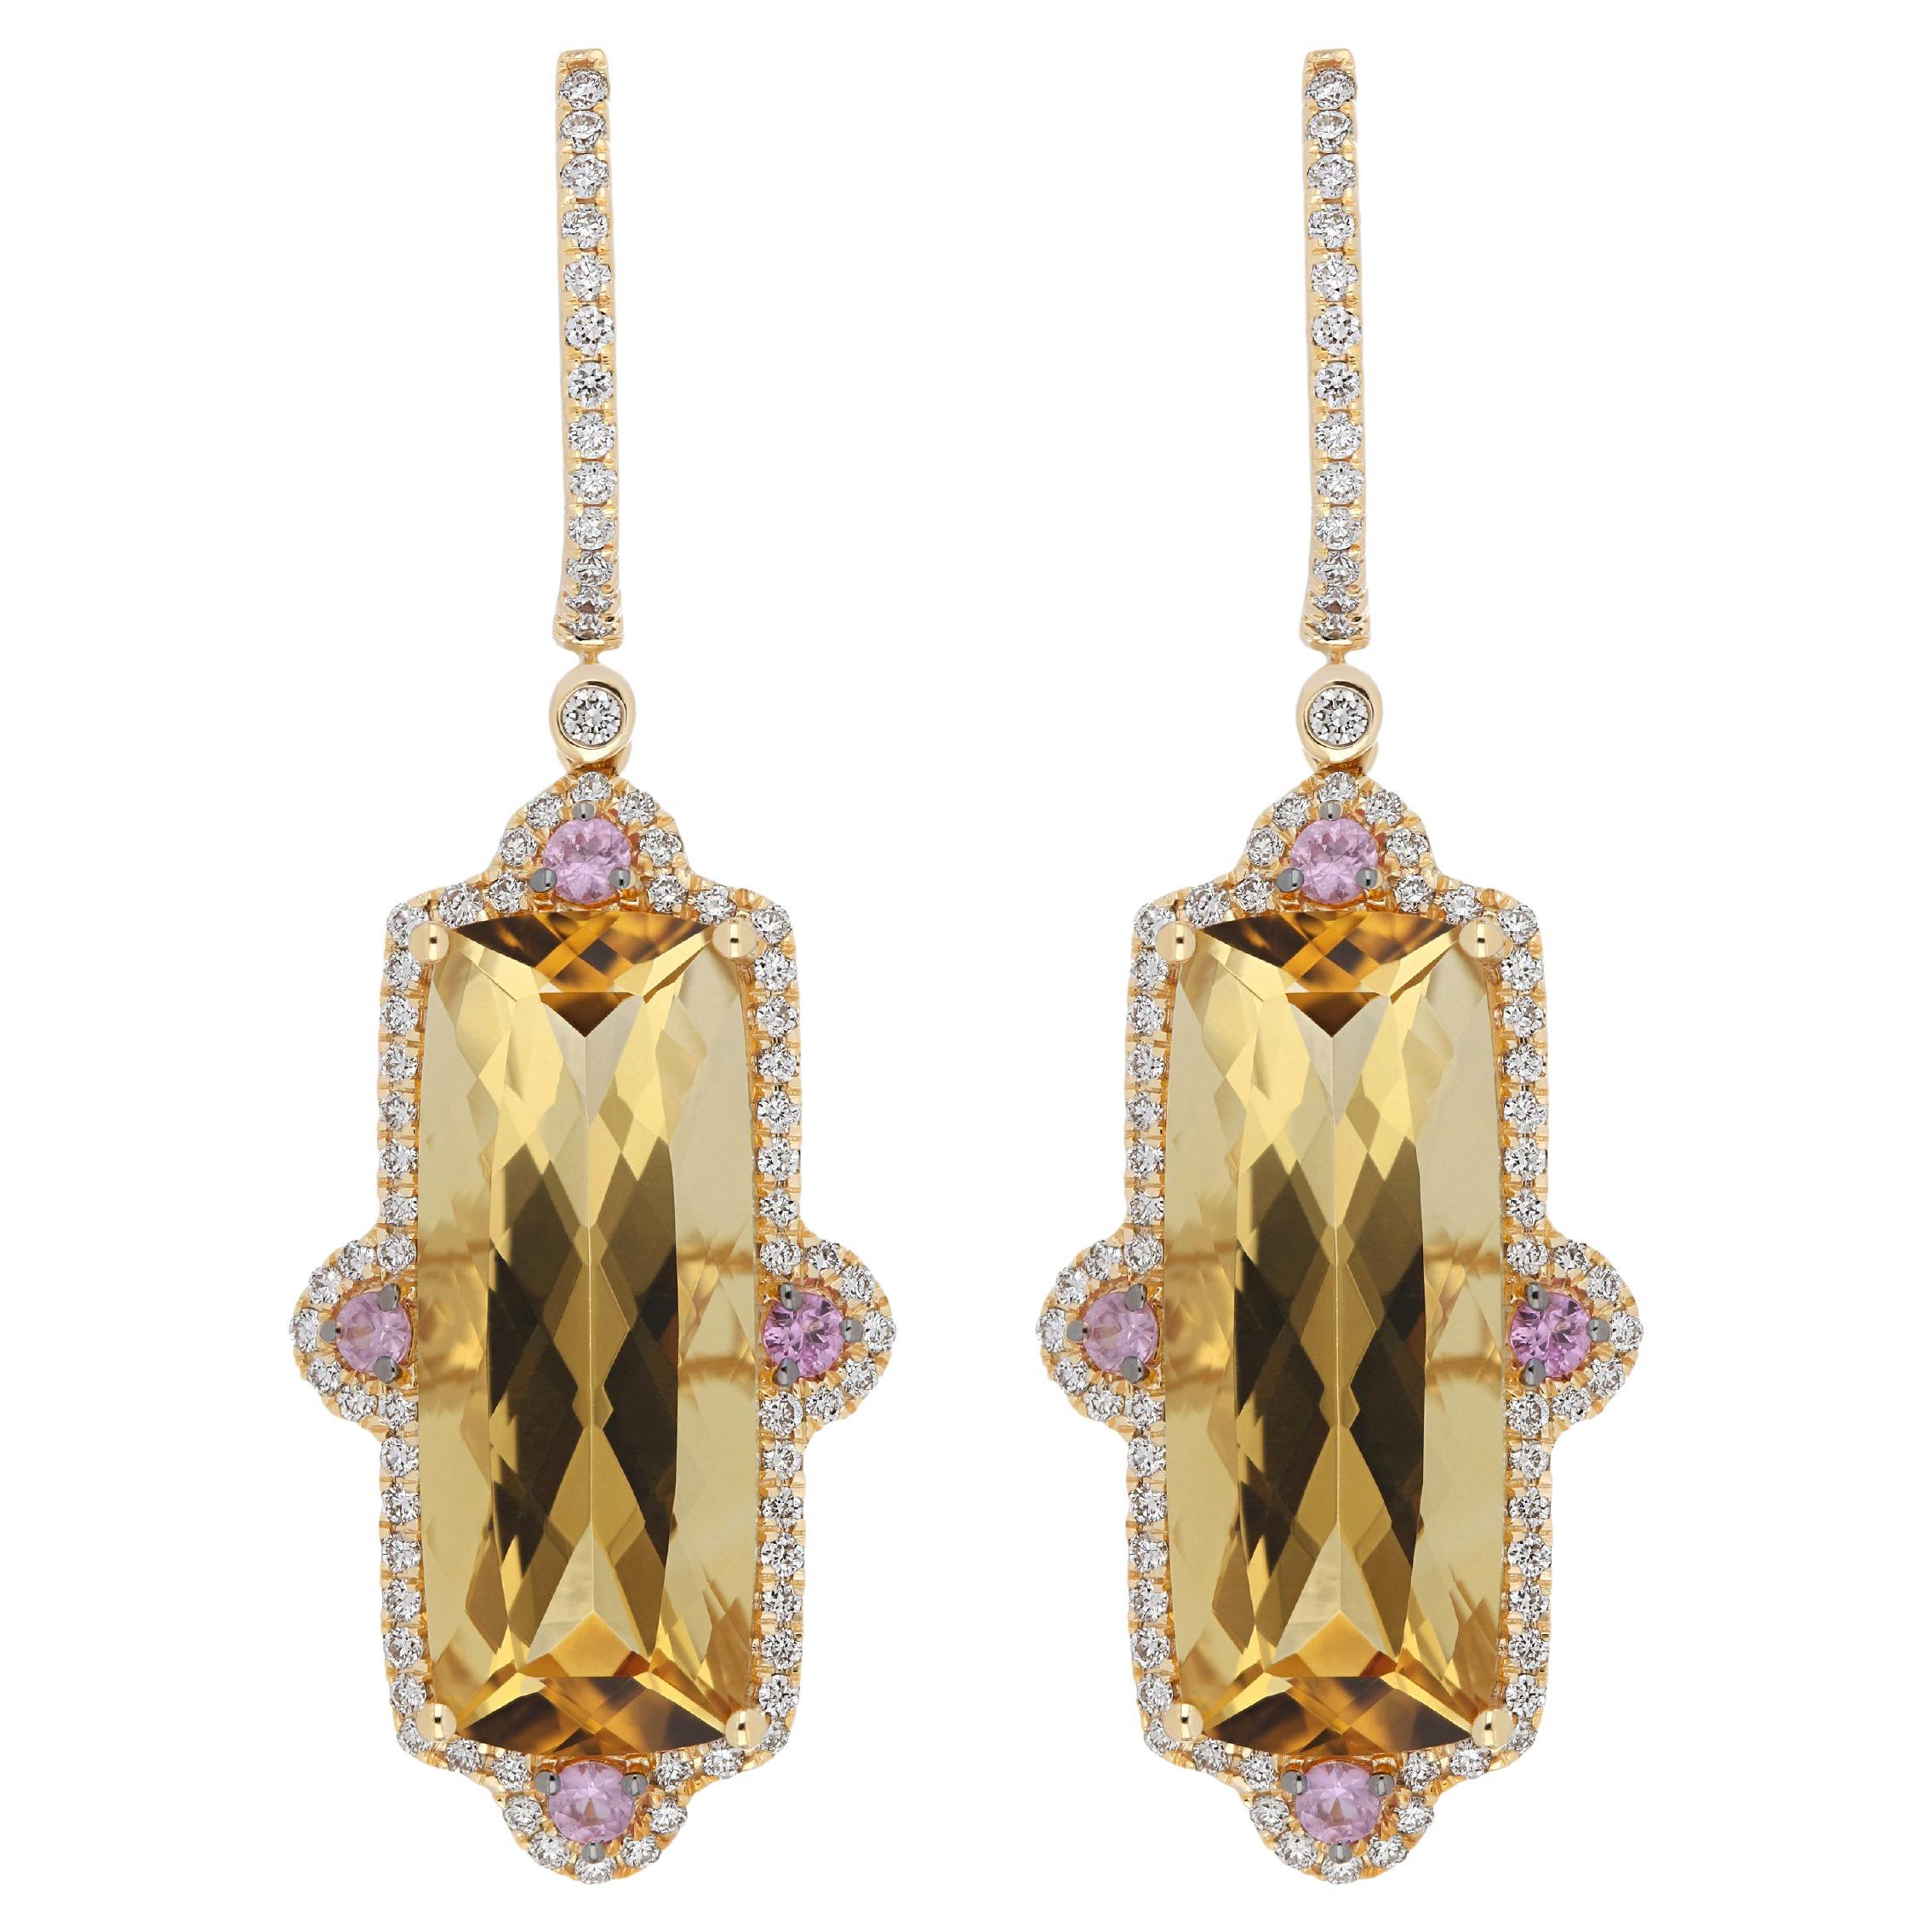 Citrine, Pink Sapphire and Diamond Studded Earrings in 14 Karat Yellow Gold